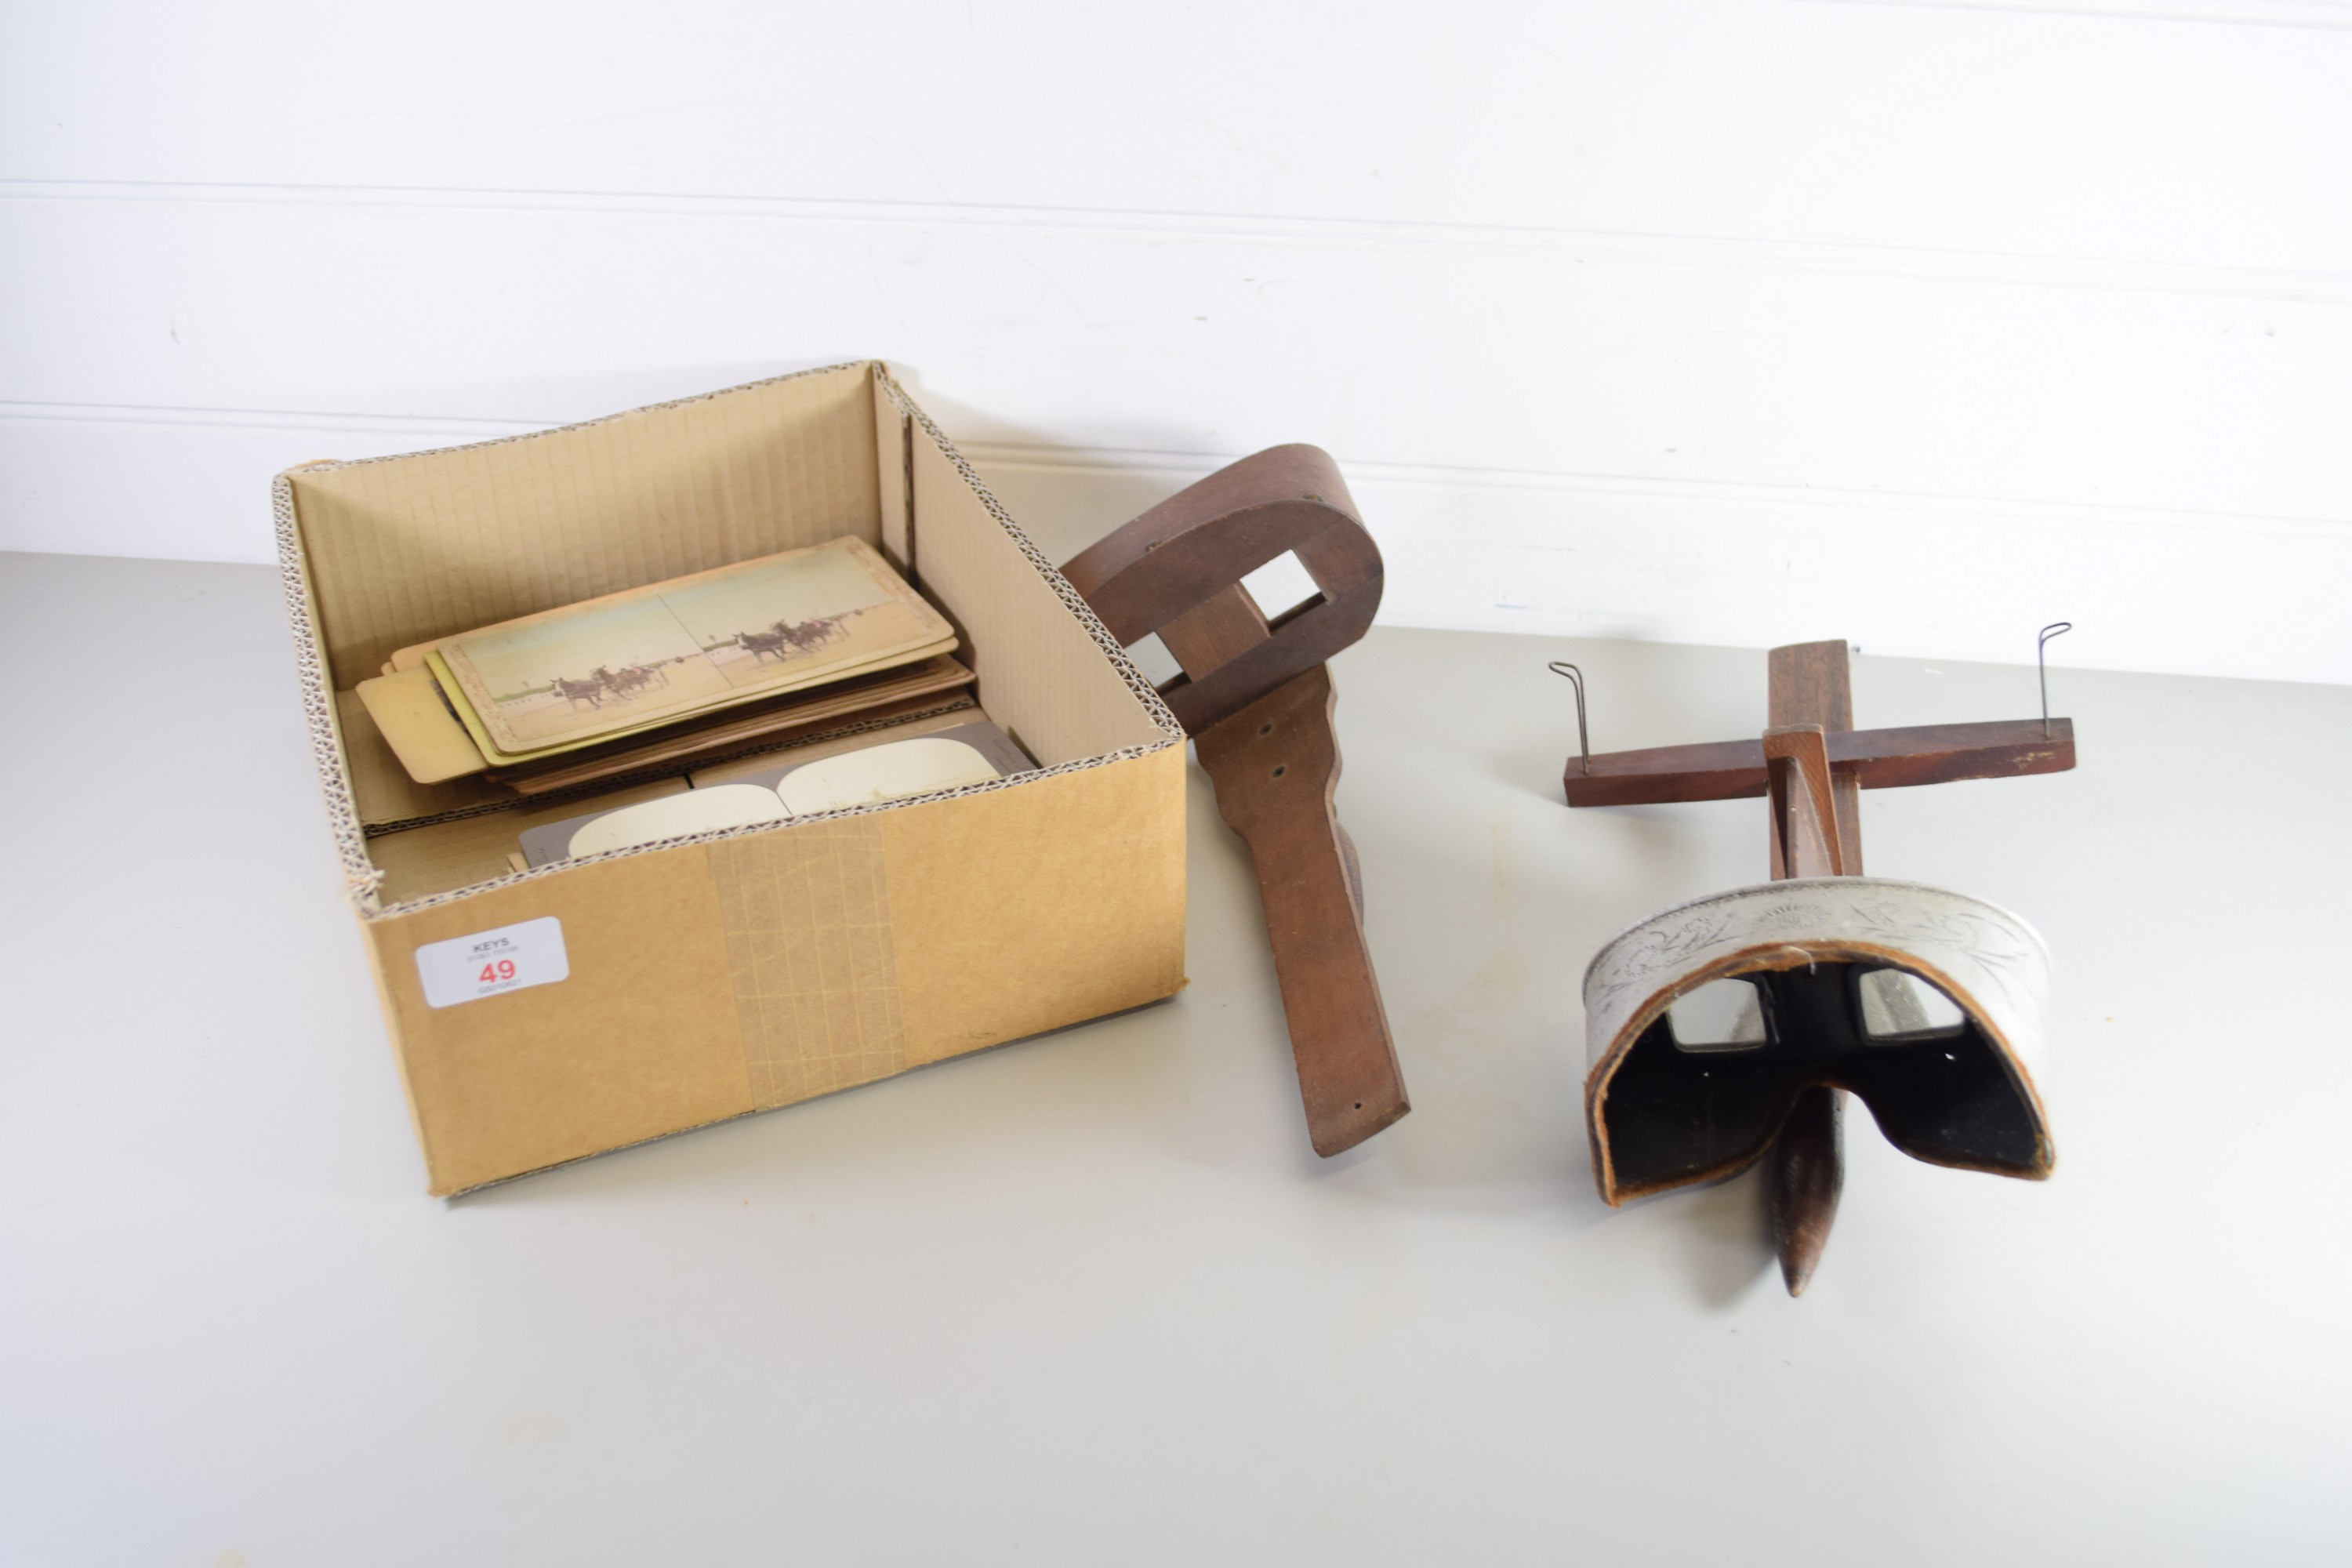 TWO STEREOSCOPIC VIEWFINDERS WITH QUANTITY OF CARDS, MAINLY TOPOGRAPHICAL